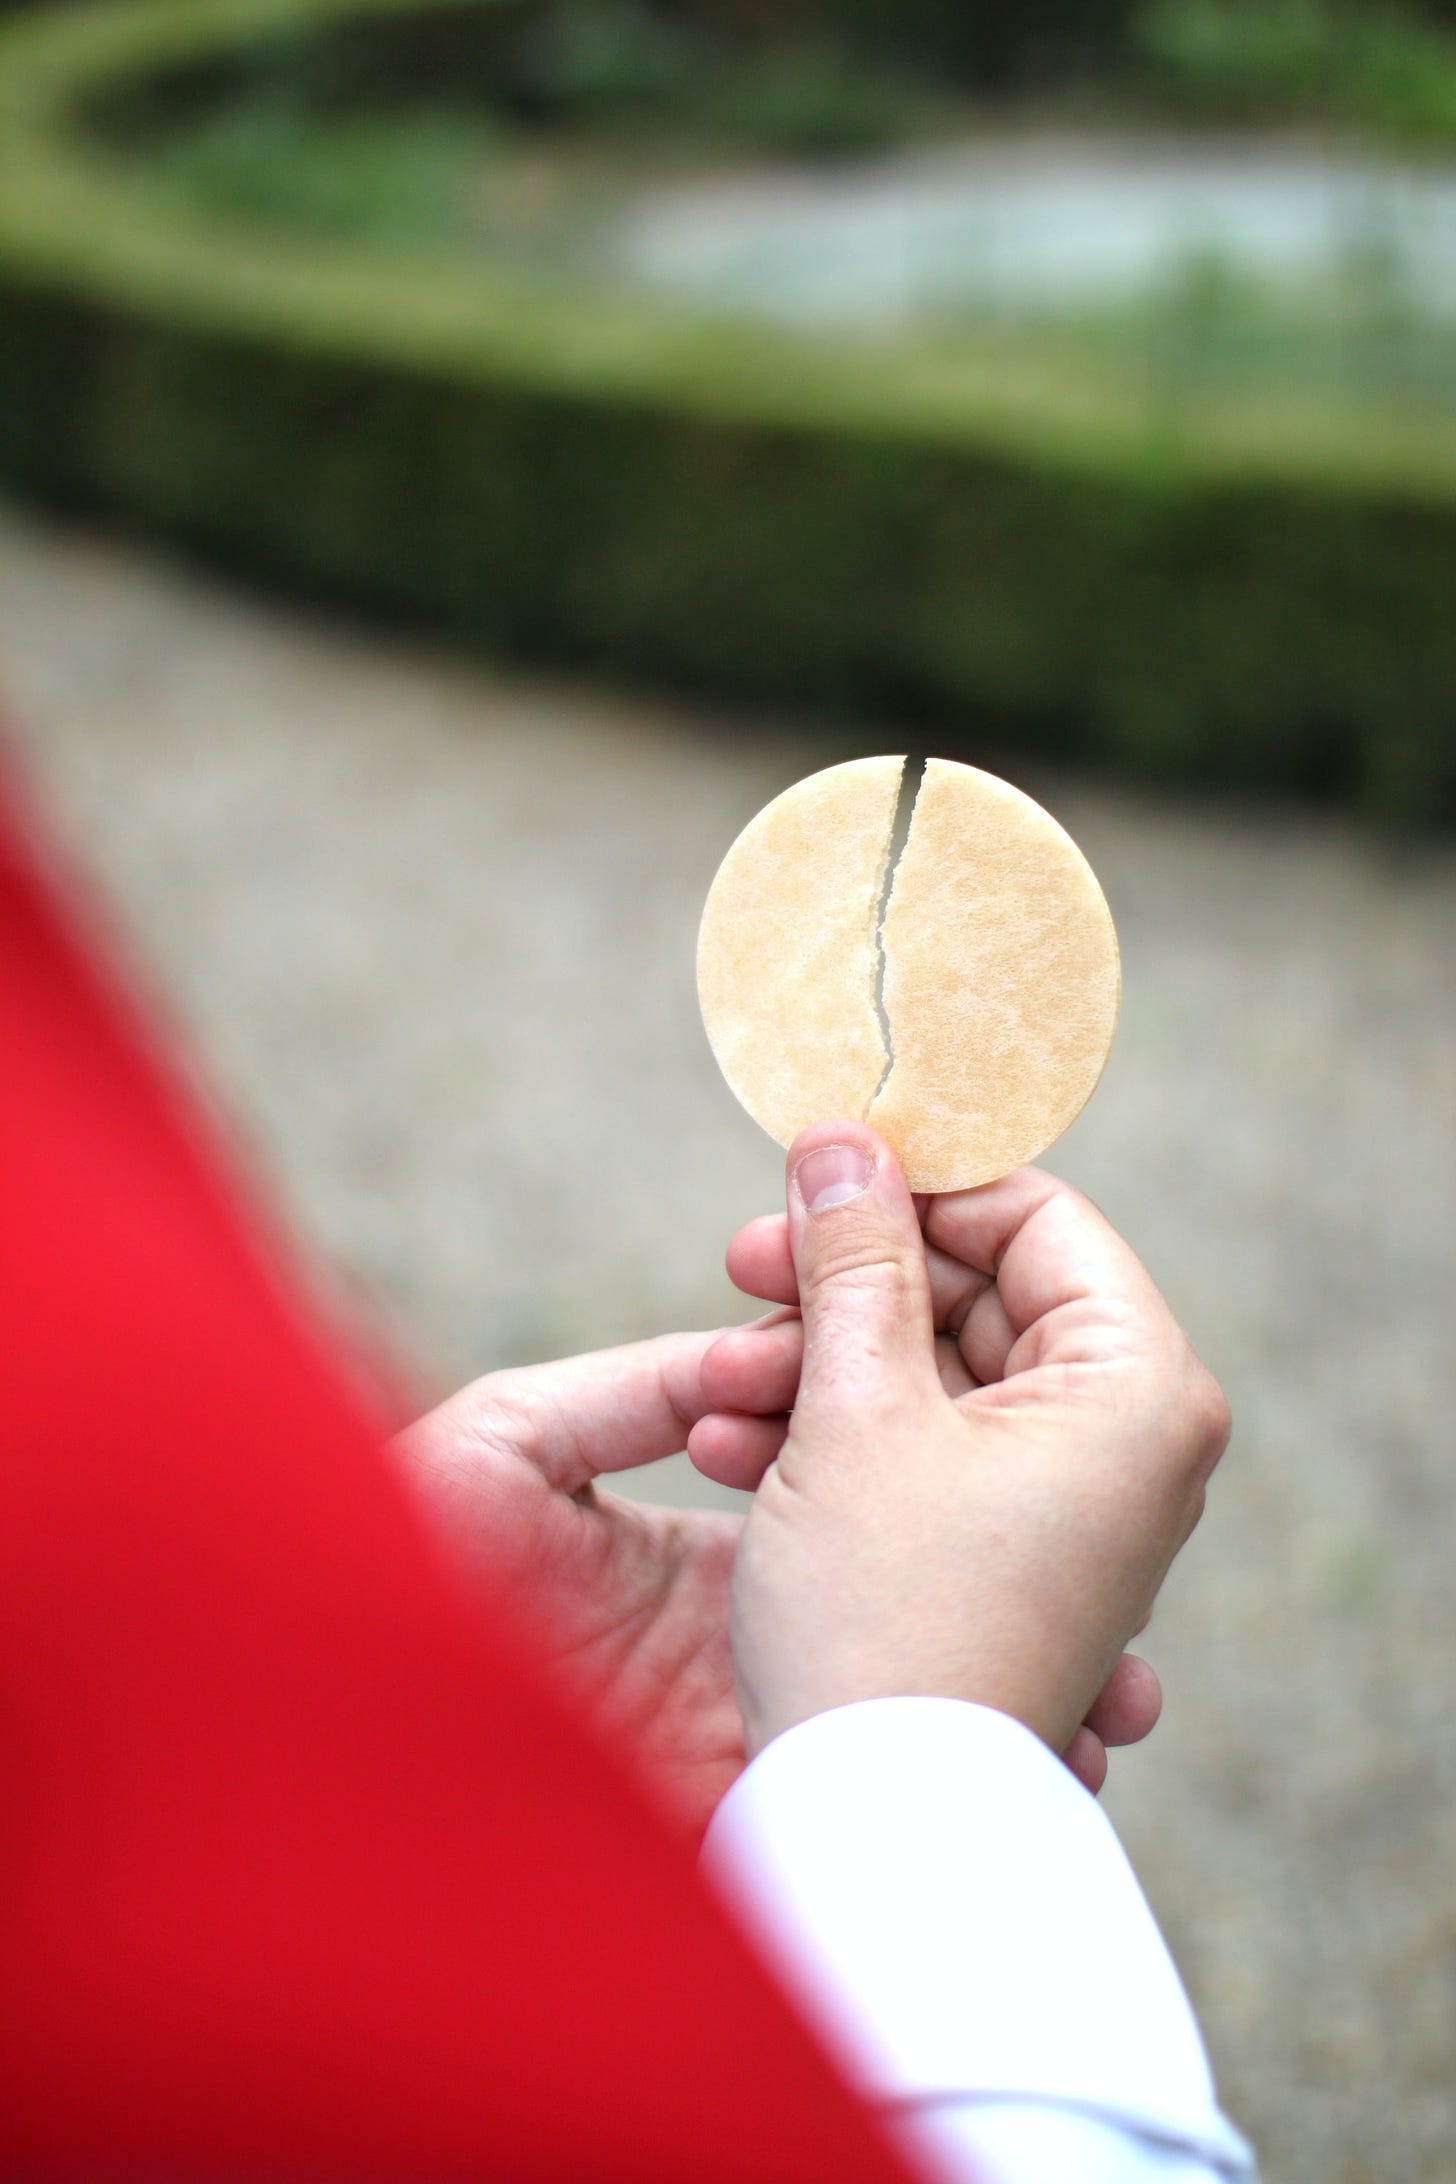 'Healed by the Eucharist' - Minnesota ministry aims to bring communion to survivors